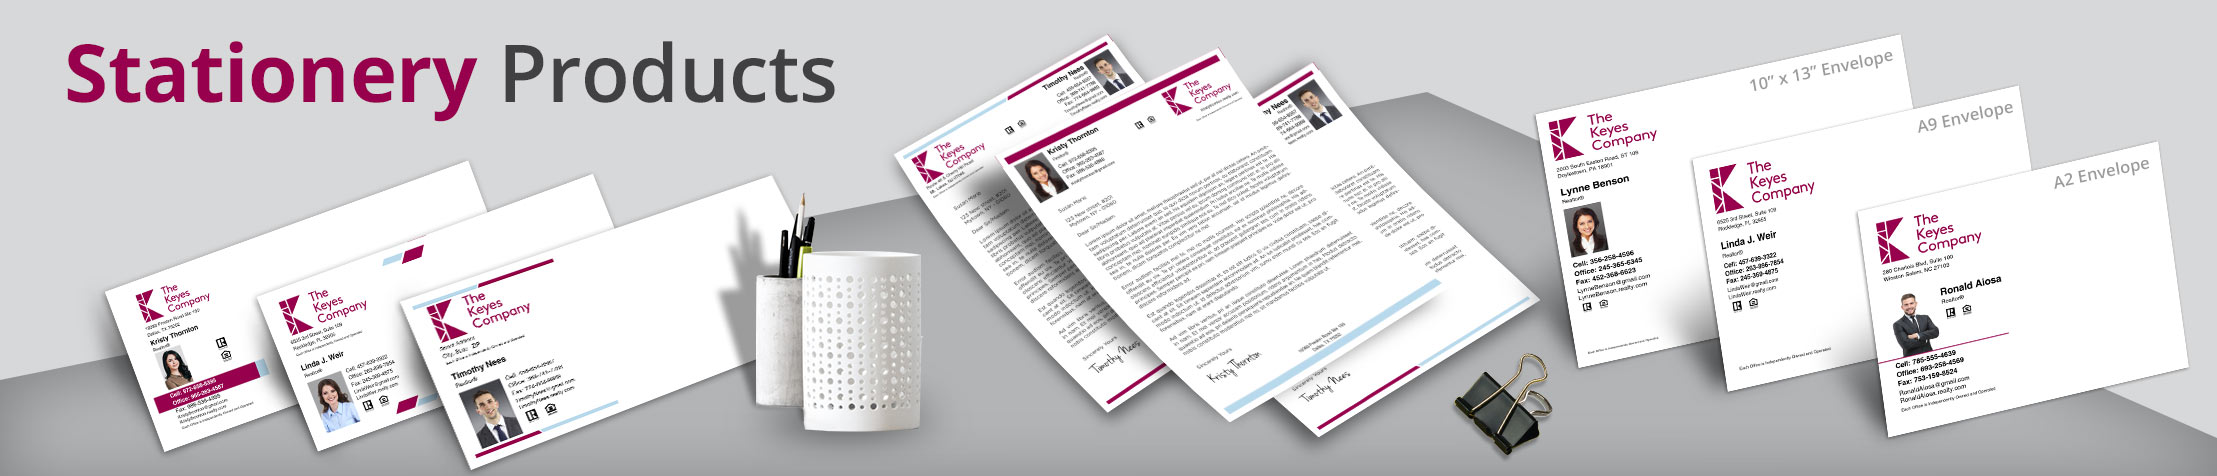 The Keyes Company Real Estate Stationery Products - Custom Letterhead & Envelopes Stationery Products for Realtors | BestPrintBuy.com